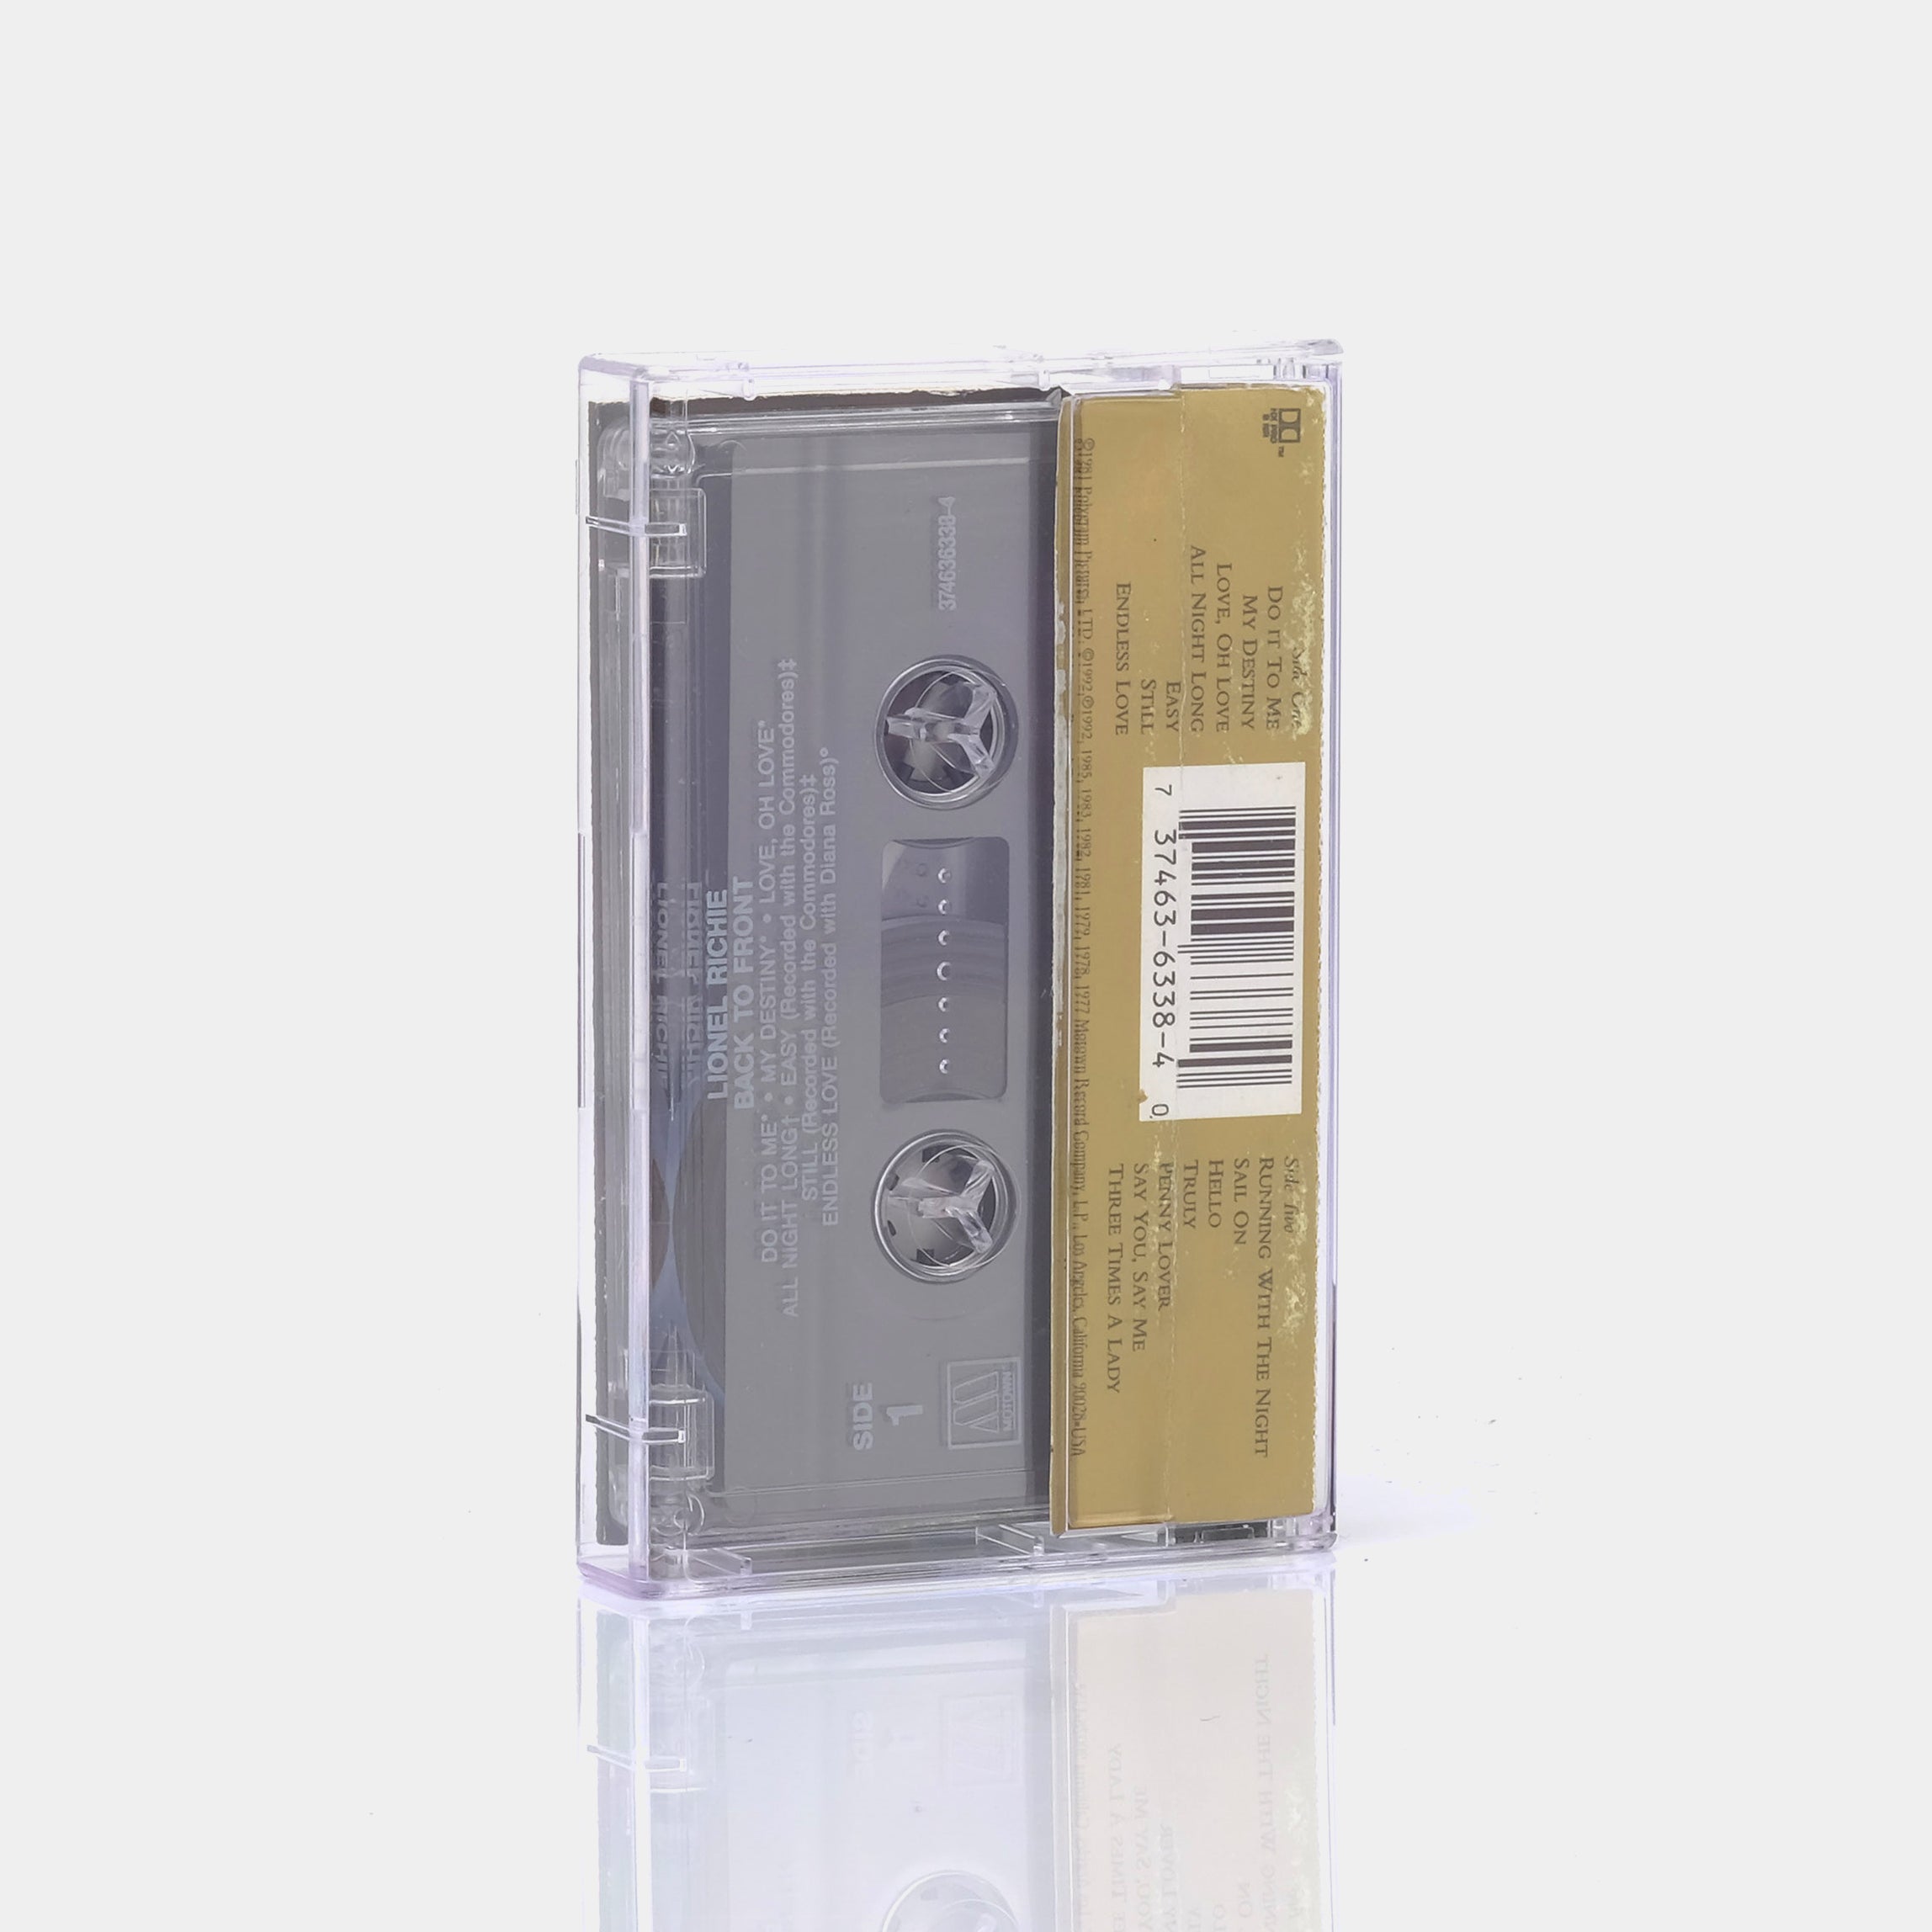 Lionel Richie - Back To Front Cassette Tape